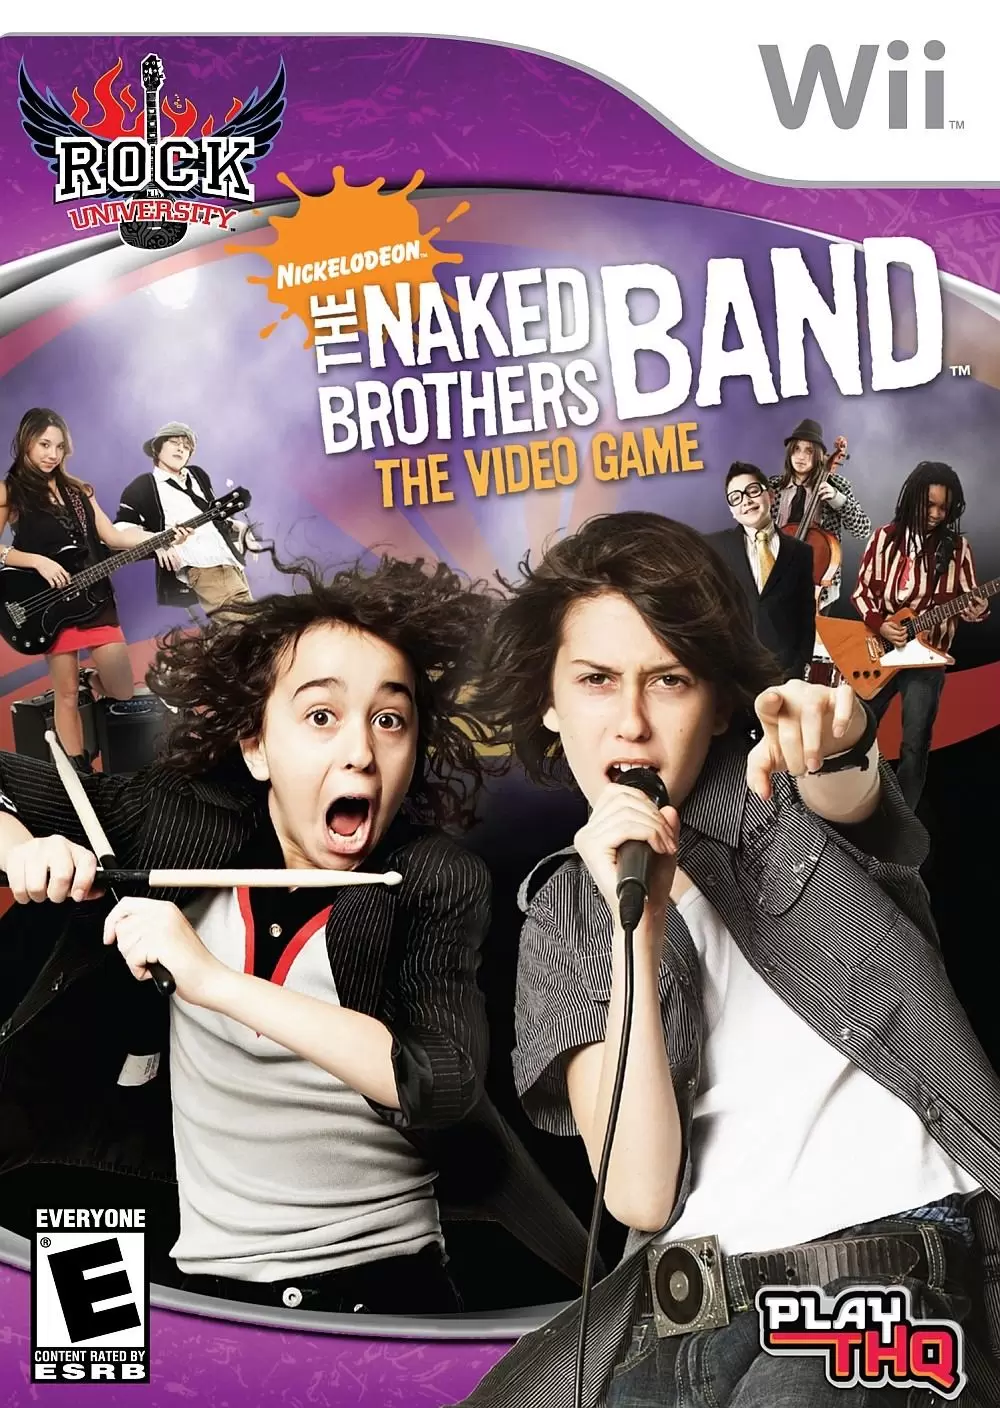 Jeux Nintendo Wii - Rock University Presents the Naked Brothers Band